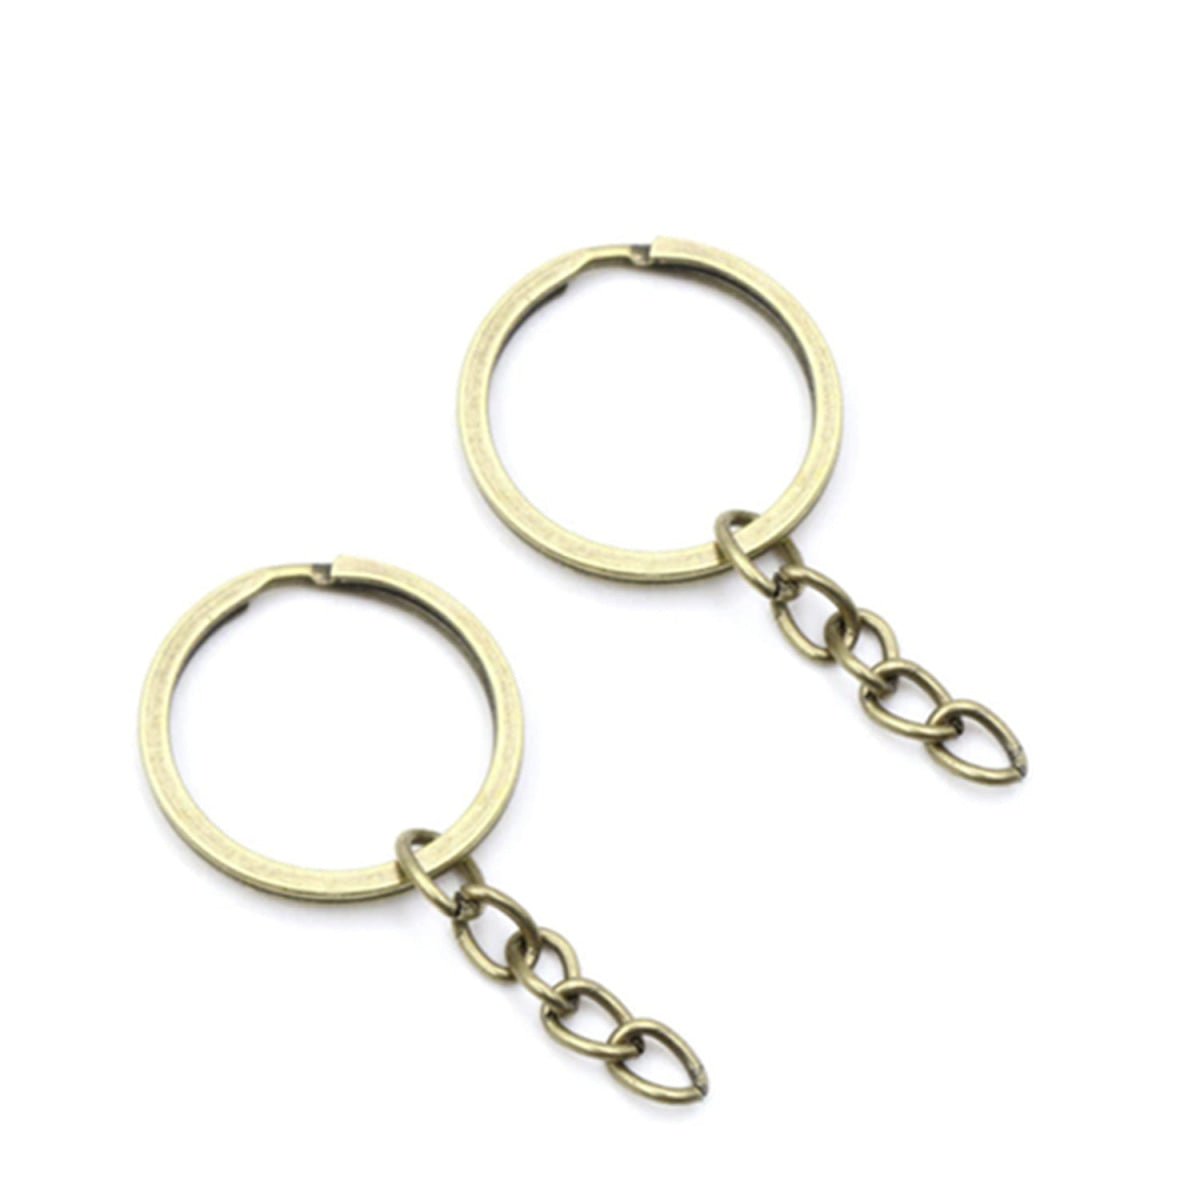 20pcs 25mm Rose Gold Ancient Keyring Keychain Split Ring Chain Key Rings Key Chains - Bronze - - Asia Sell